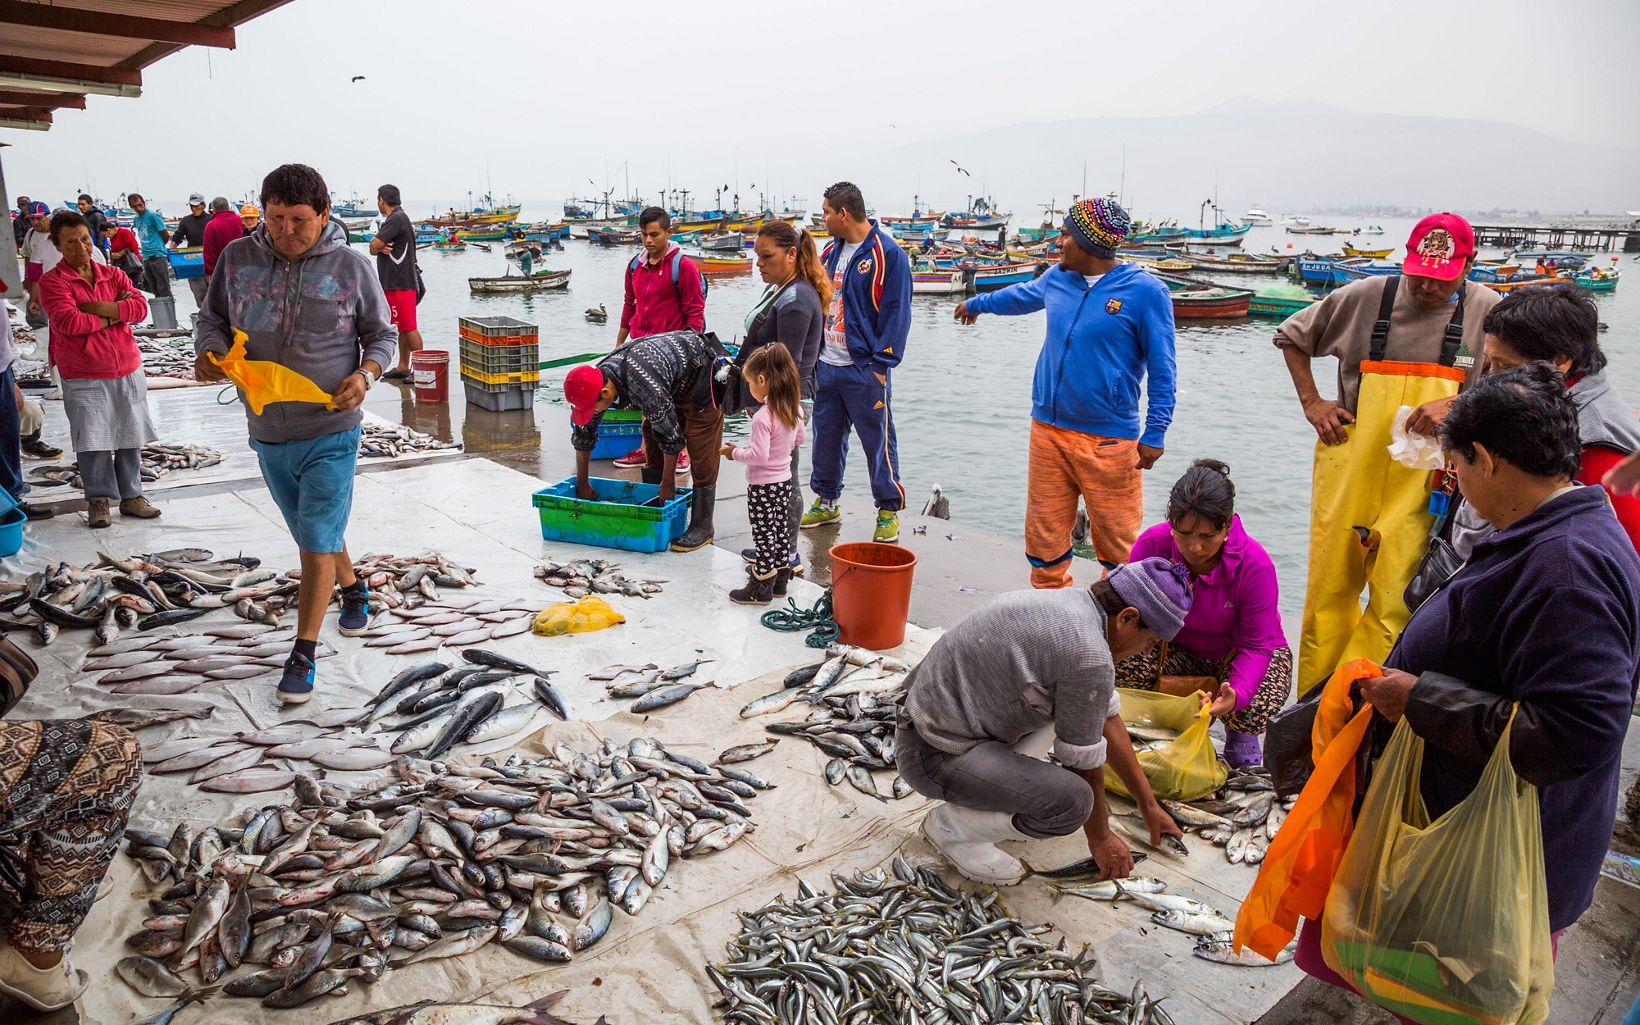 The fish market in Ancón, Peru. Ancón has thousands of years of history harvesting food from the sea and is working together as a community to make their practices as responsible as possible. ©  Jason Houston